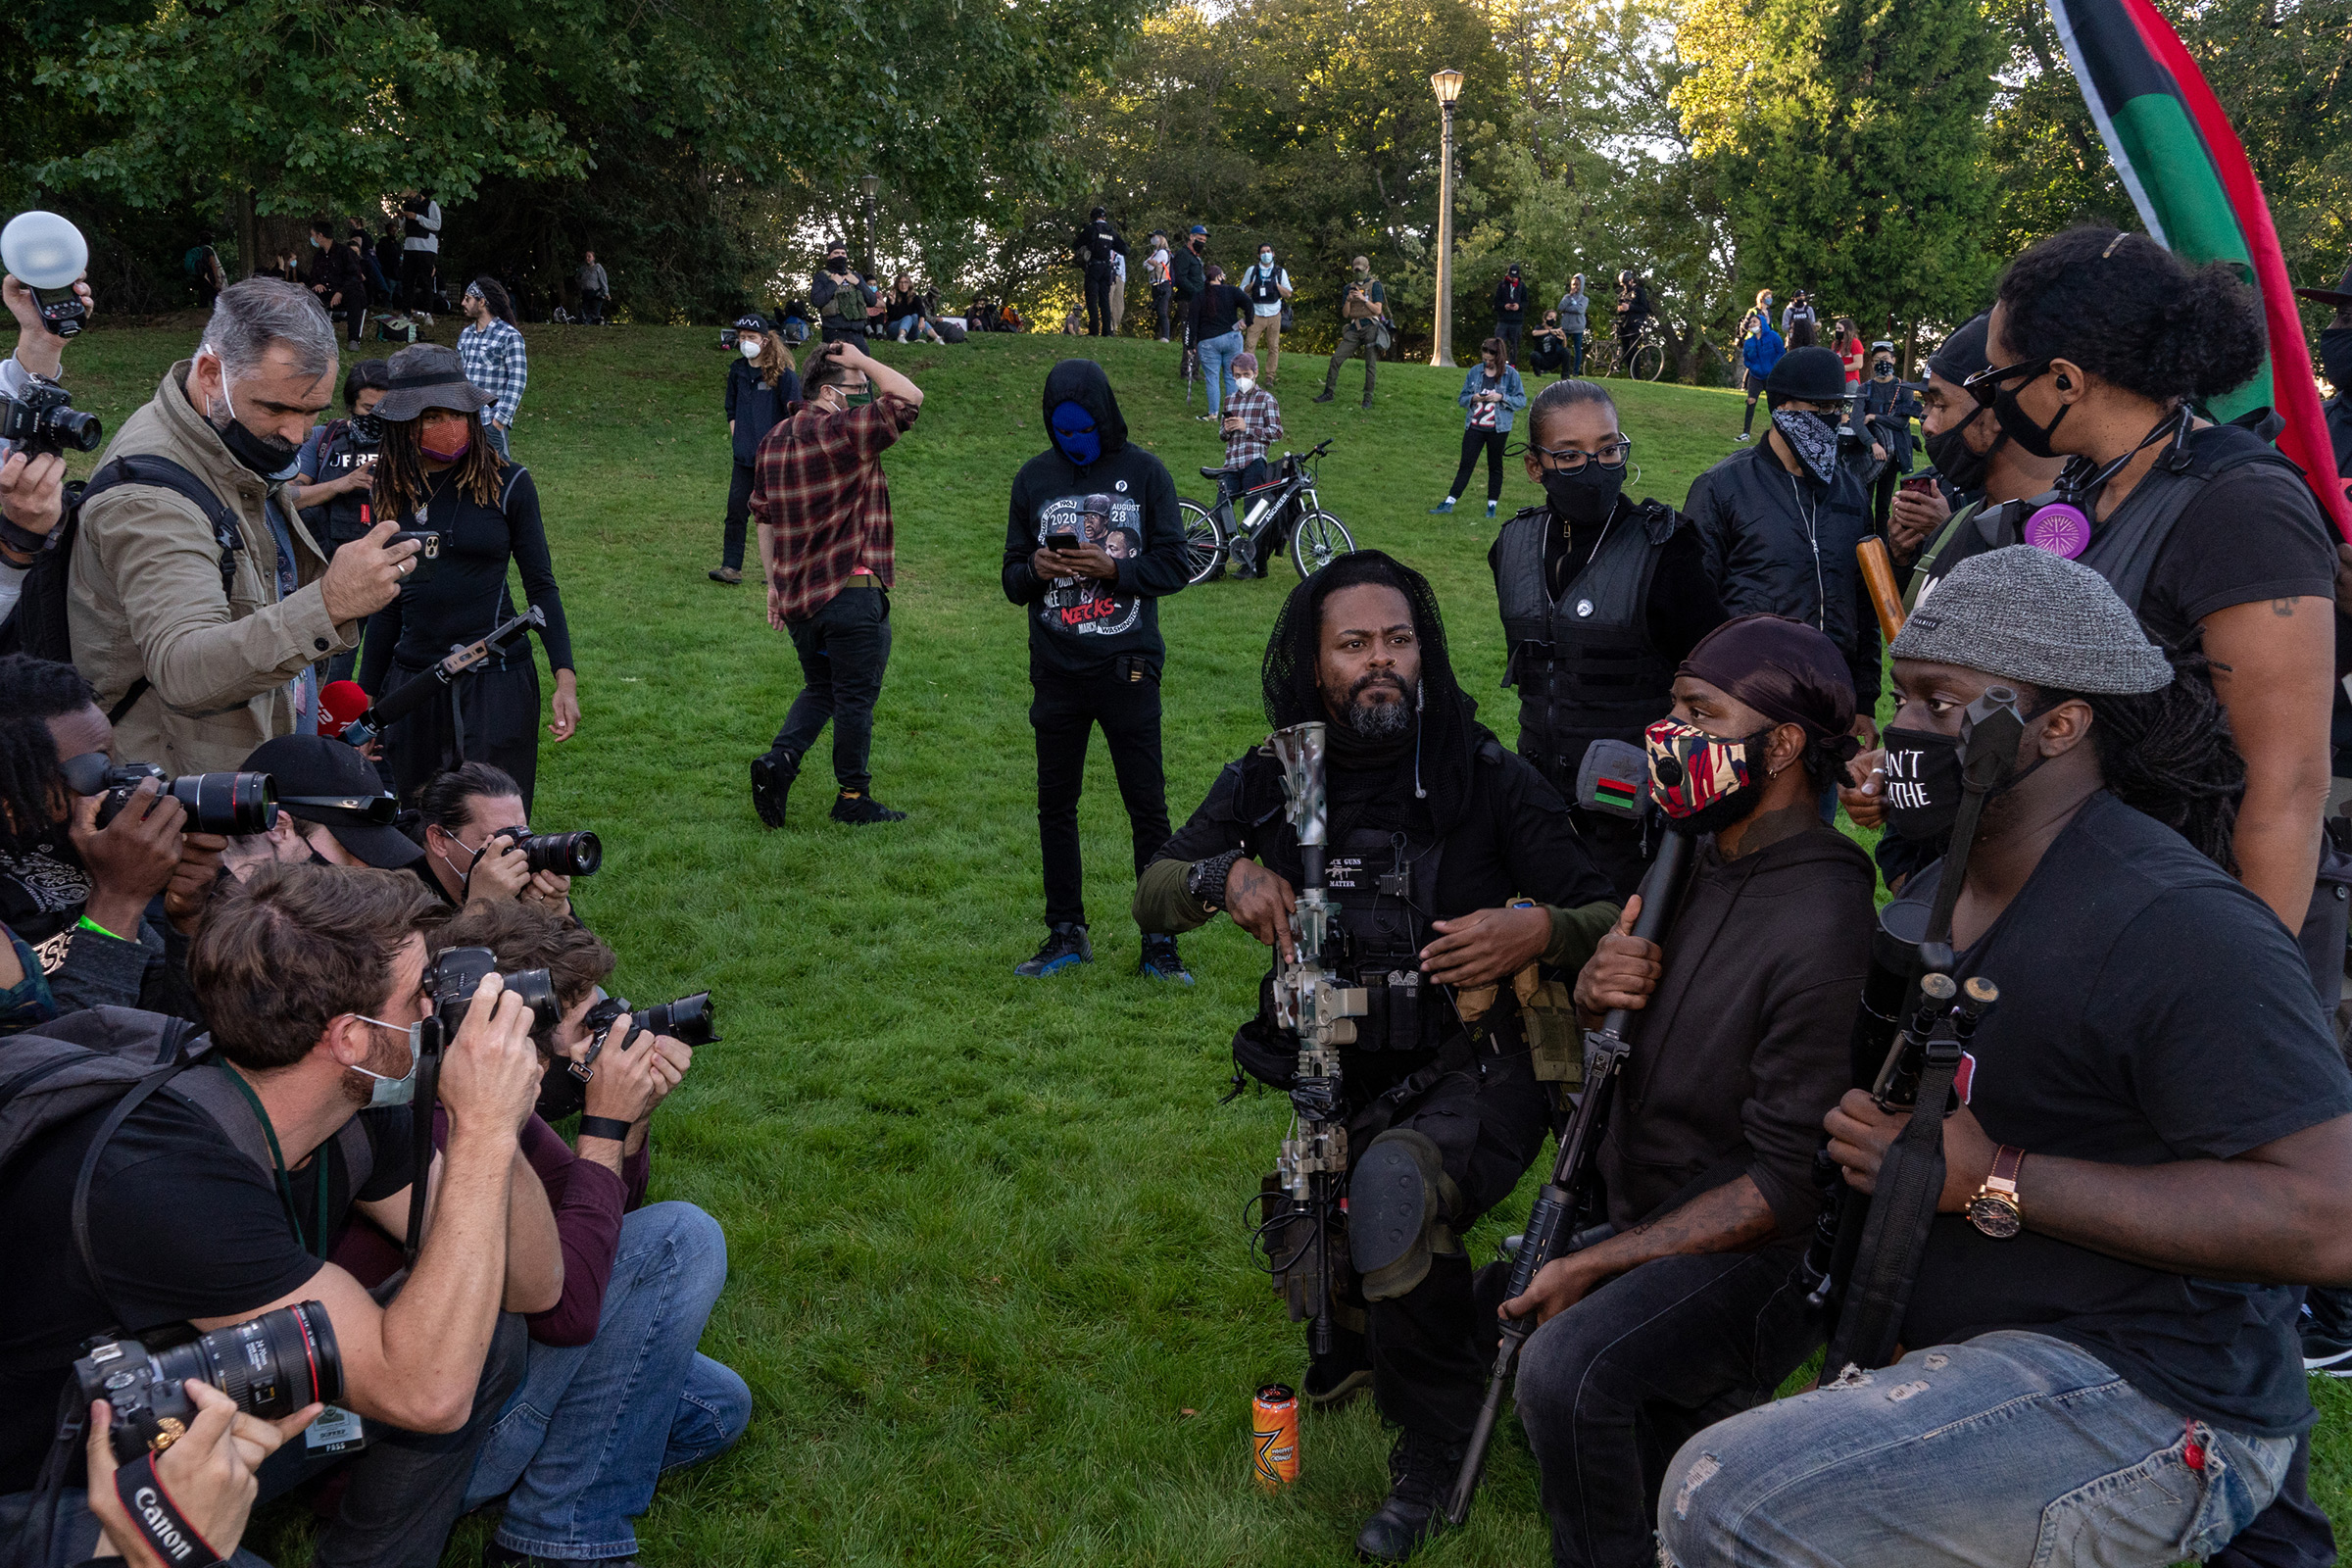 <strong>Portland, Ore., Sept. 26, 2020.</strong> "Militia members pose for the media at a Black Lives Matter protest. On the same day, in a nearby park, a Black Lives Matter rally dissolved into infighting. The situation was deescalated by this Black militia, which posed for photos." (Peter van Agtmael—Magnum Photos for TIME)